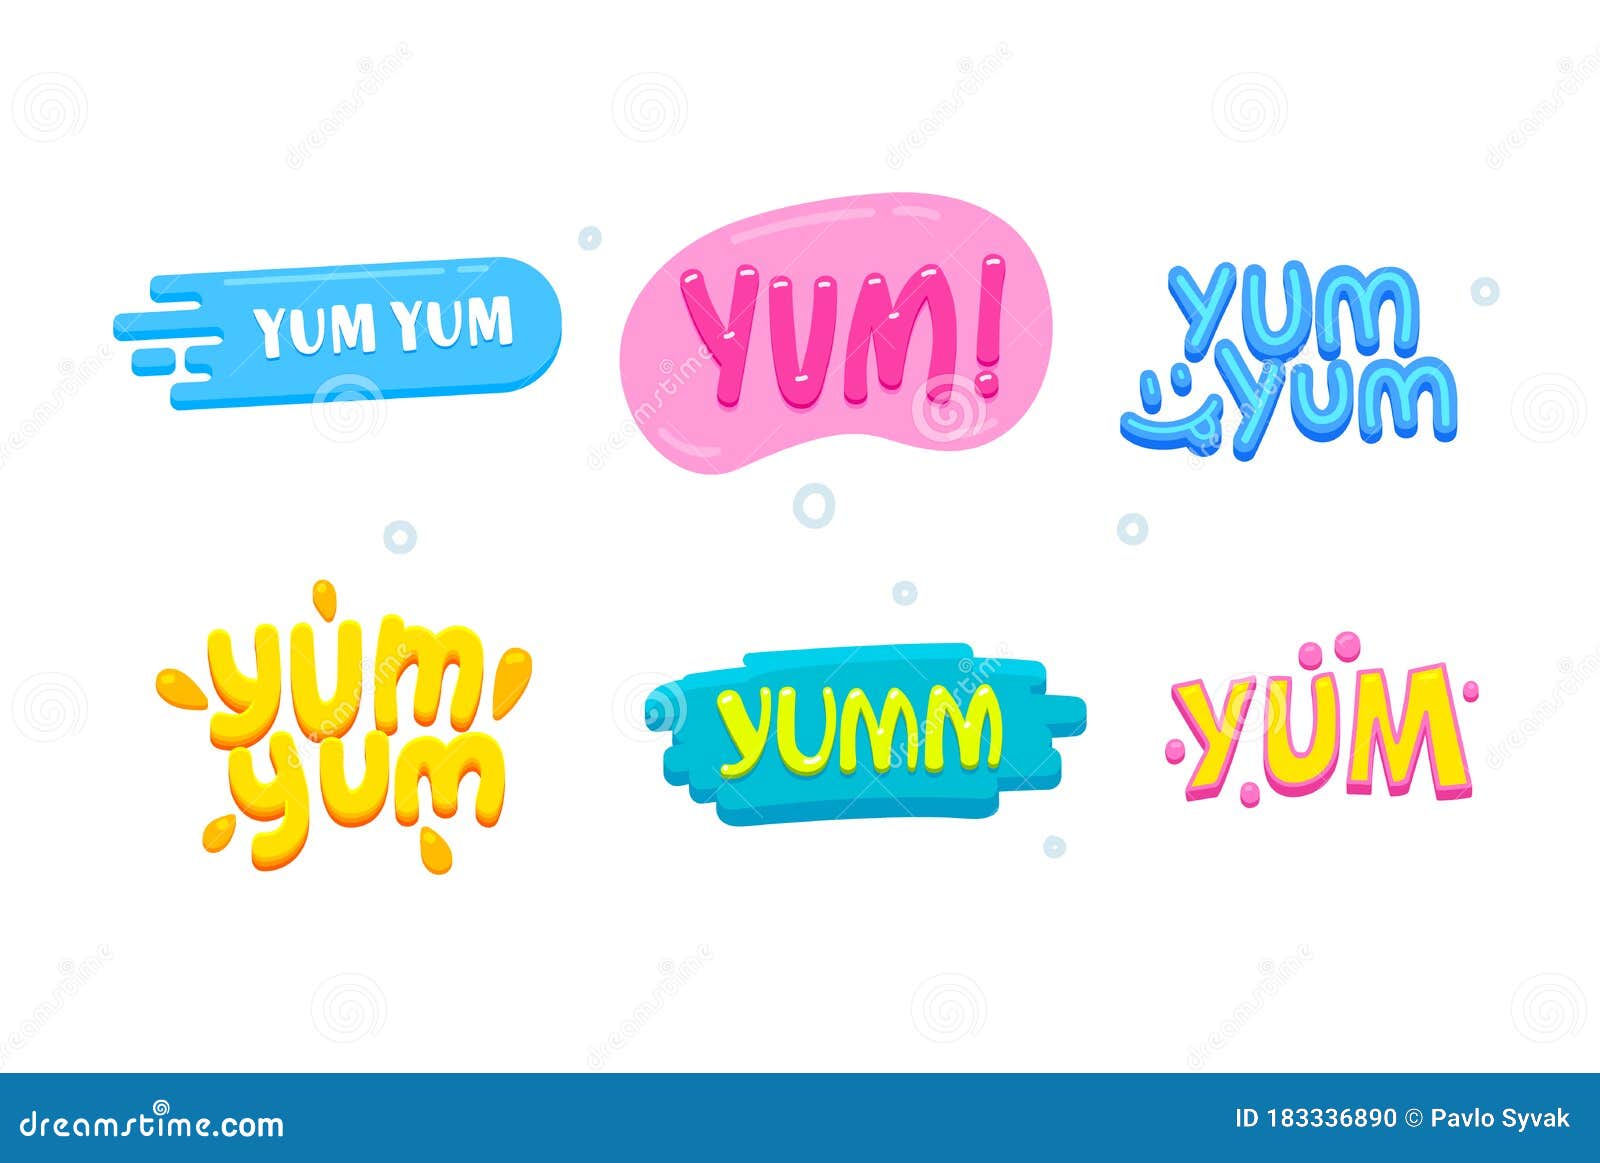 https://thumbs.dreamstime.com/z/yum-icons-set-creative-banners-colorful-typography-design-elements-text-composition-isolated-white-background-tags-183336890.jpg